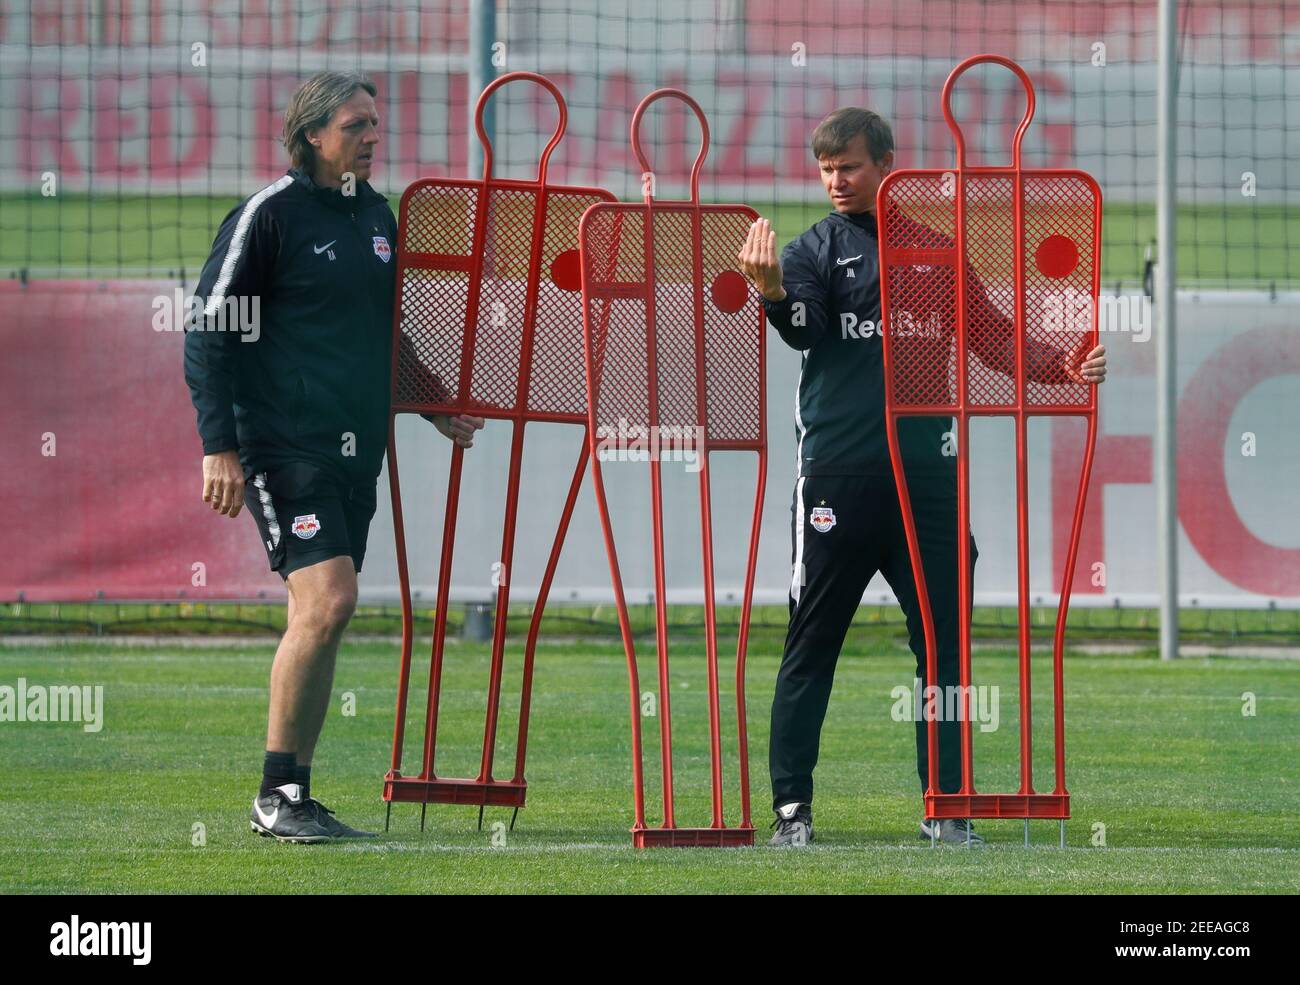 Soccer Football - Red Bull Salzburg Training - Red Bull Trainingszentrum, Salzburg, Austria - April 21, 2020 Red Bull Salzburg's coach Jesse Marsch during training despite most sport being cancelled around the world as the spread of coronavirus disease (COVID19) continues. REUTERS/Leonhard Foeger Stock Photo